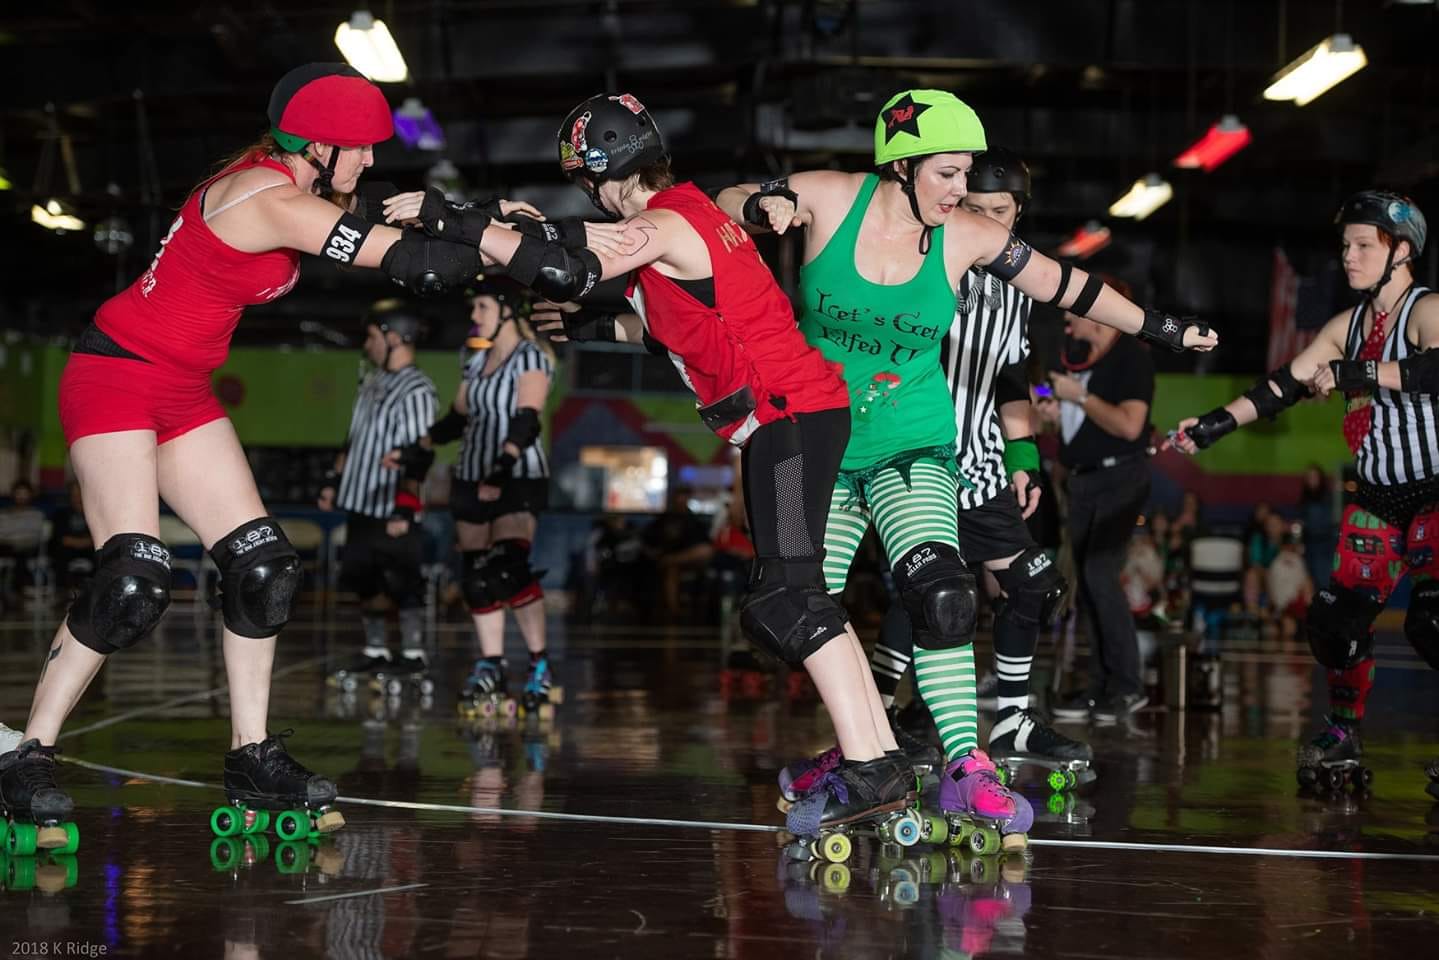 5 Things I’ve Gained from Joining Orlando Roller Derby